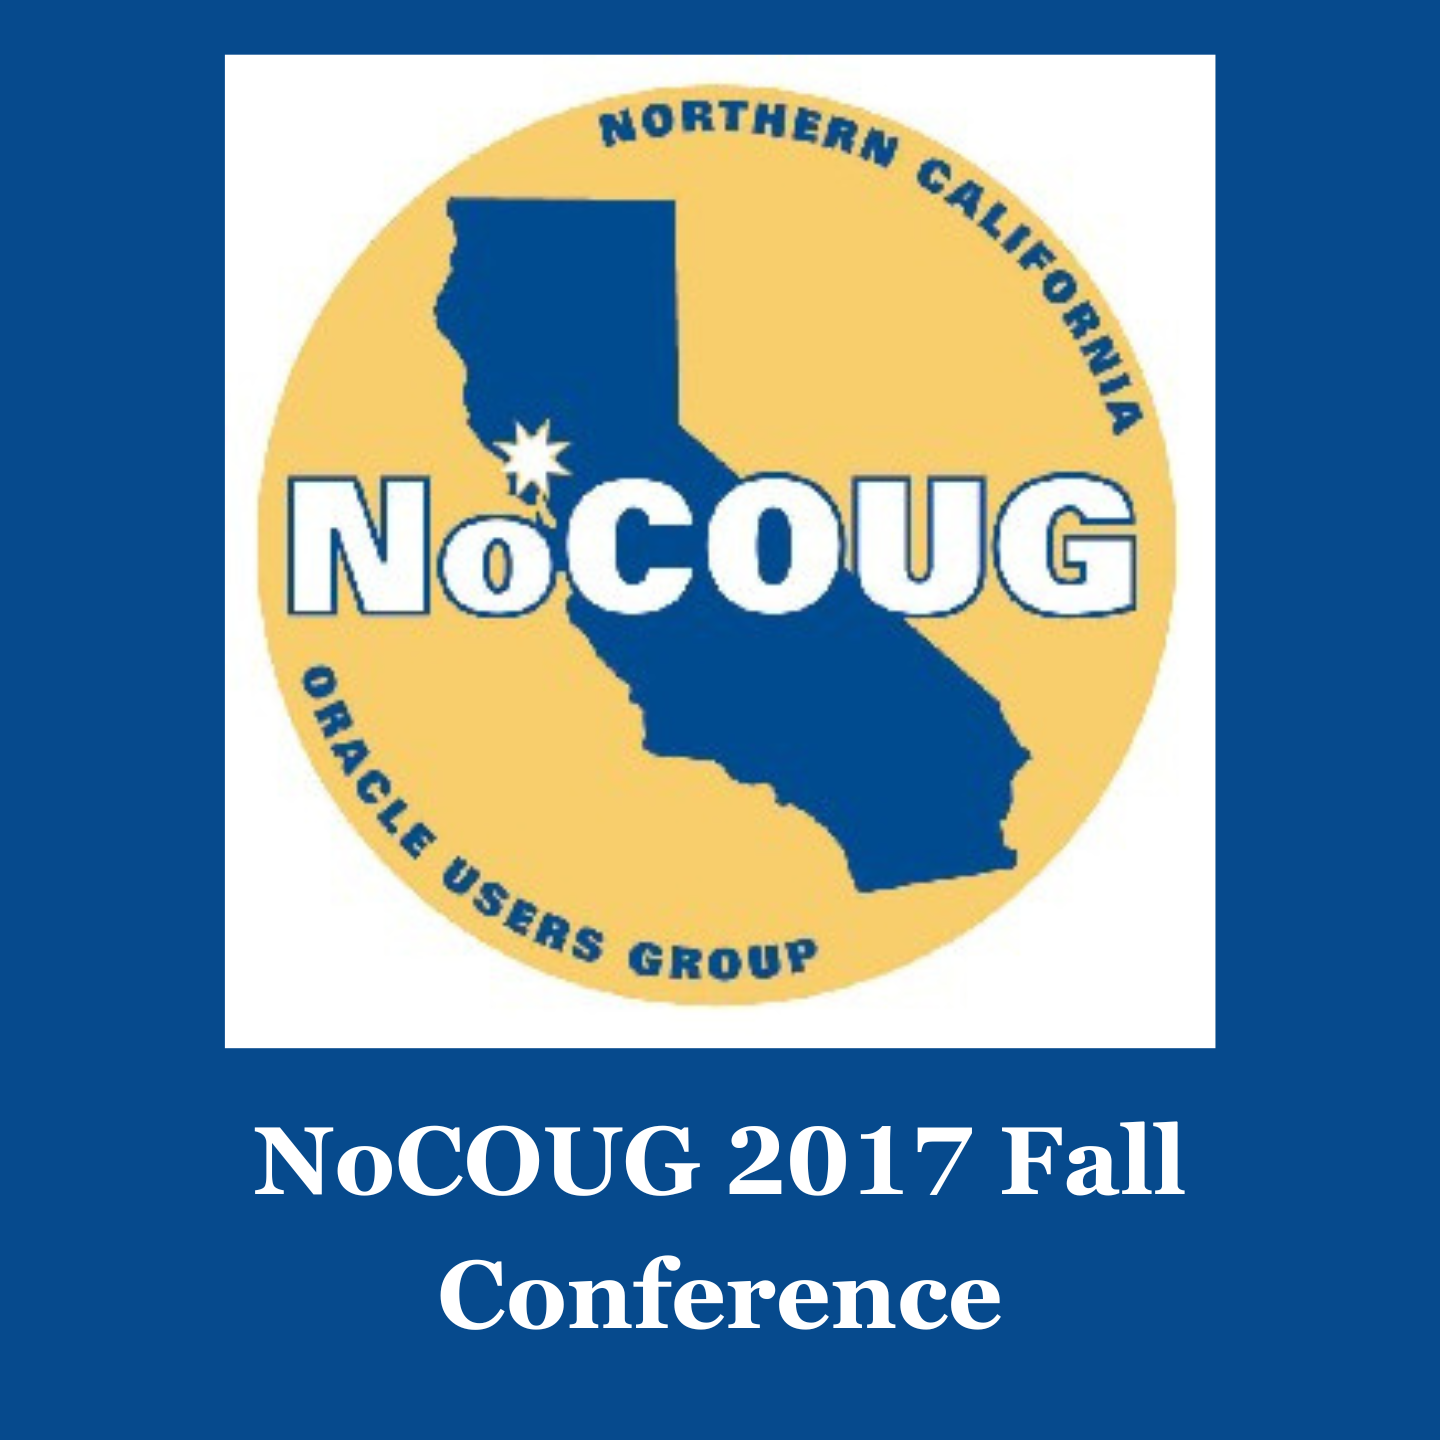 NoCOUG 2017 Fall Conference